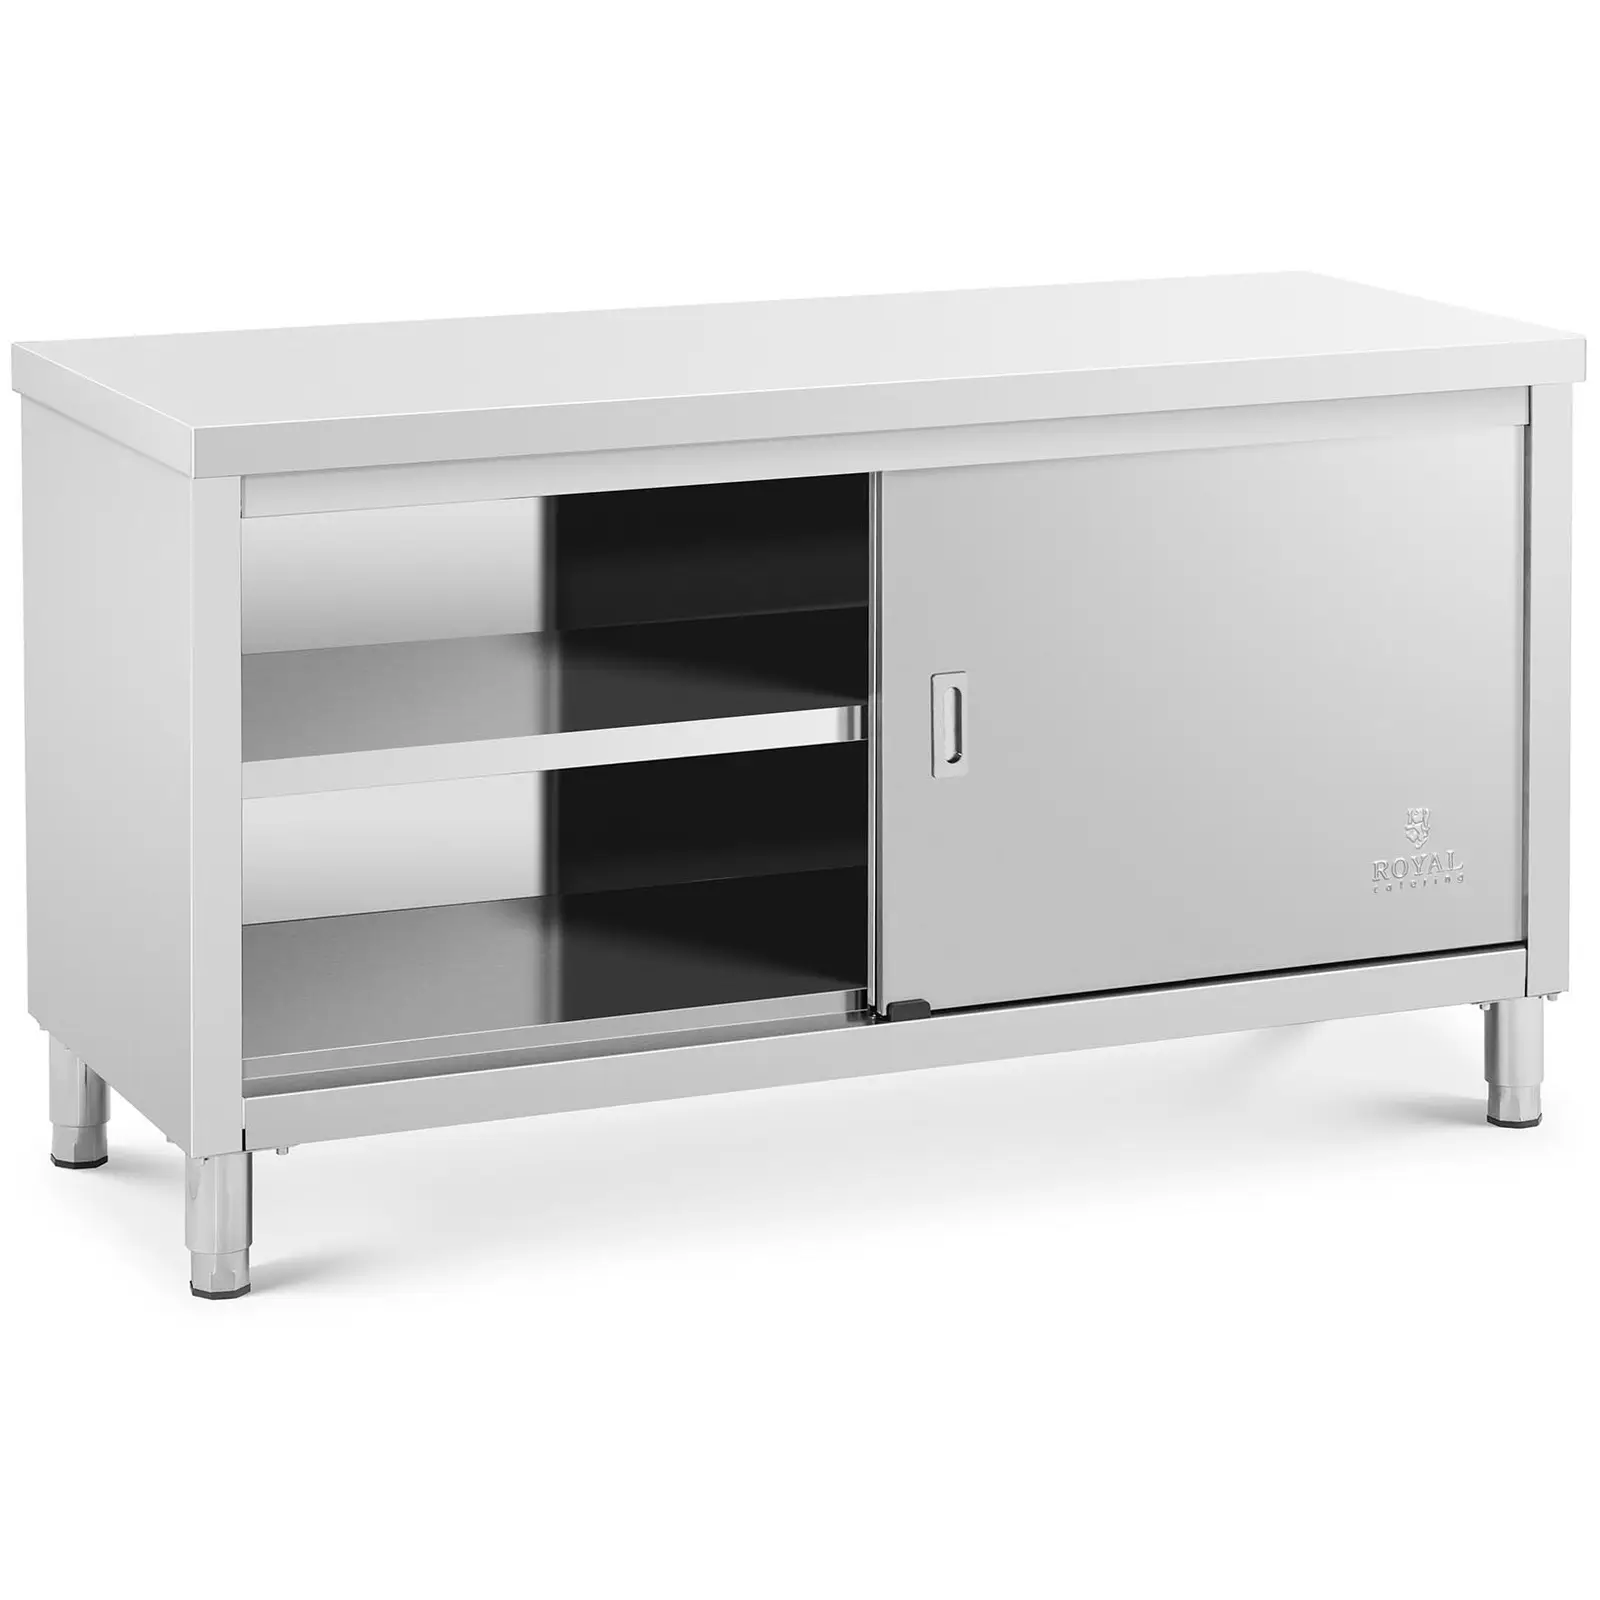 Stainless steel work cabinet - 150 x 60 x 85 cm - 600 kg Load capacity